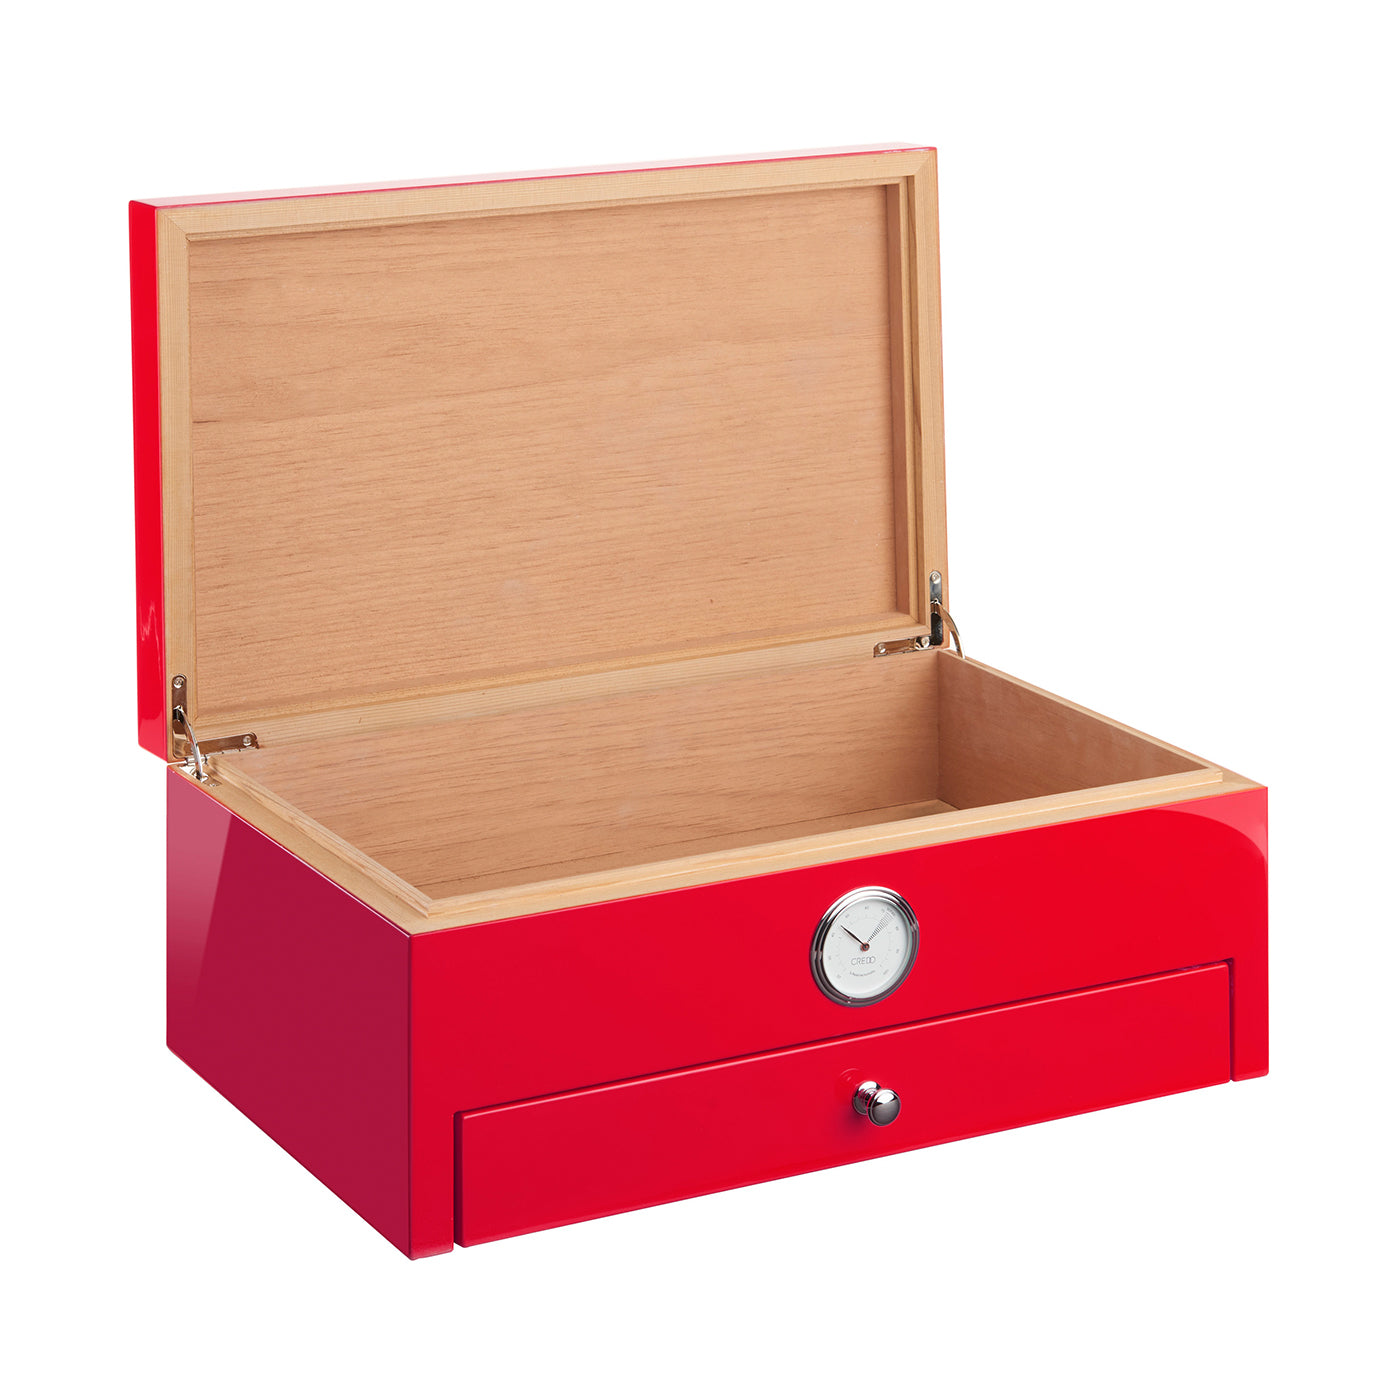 Full Color Red Humidor (Special Club Edition) - Alternative view 1